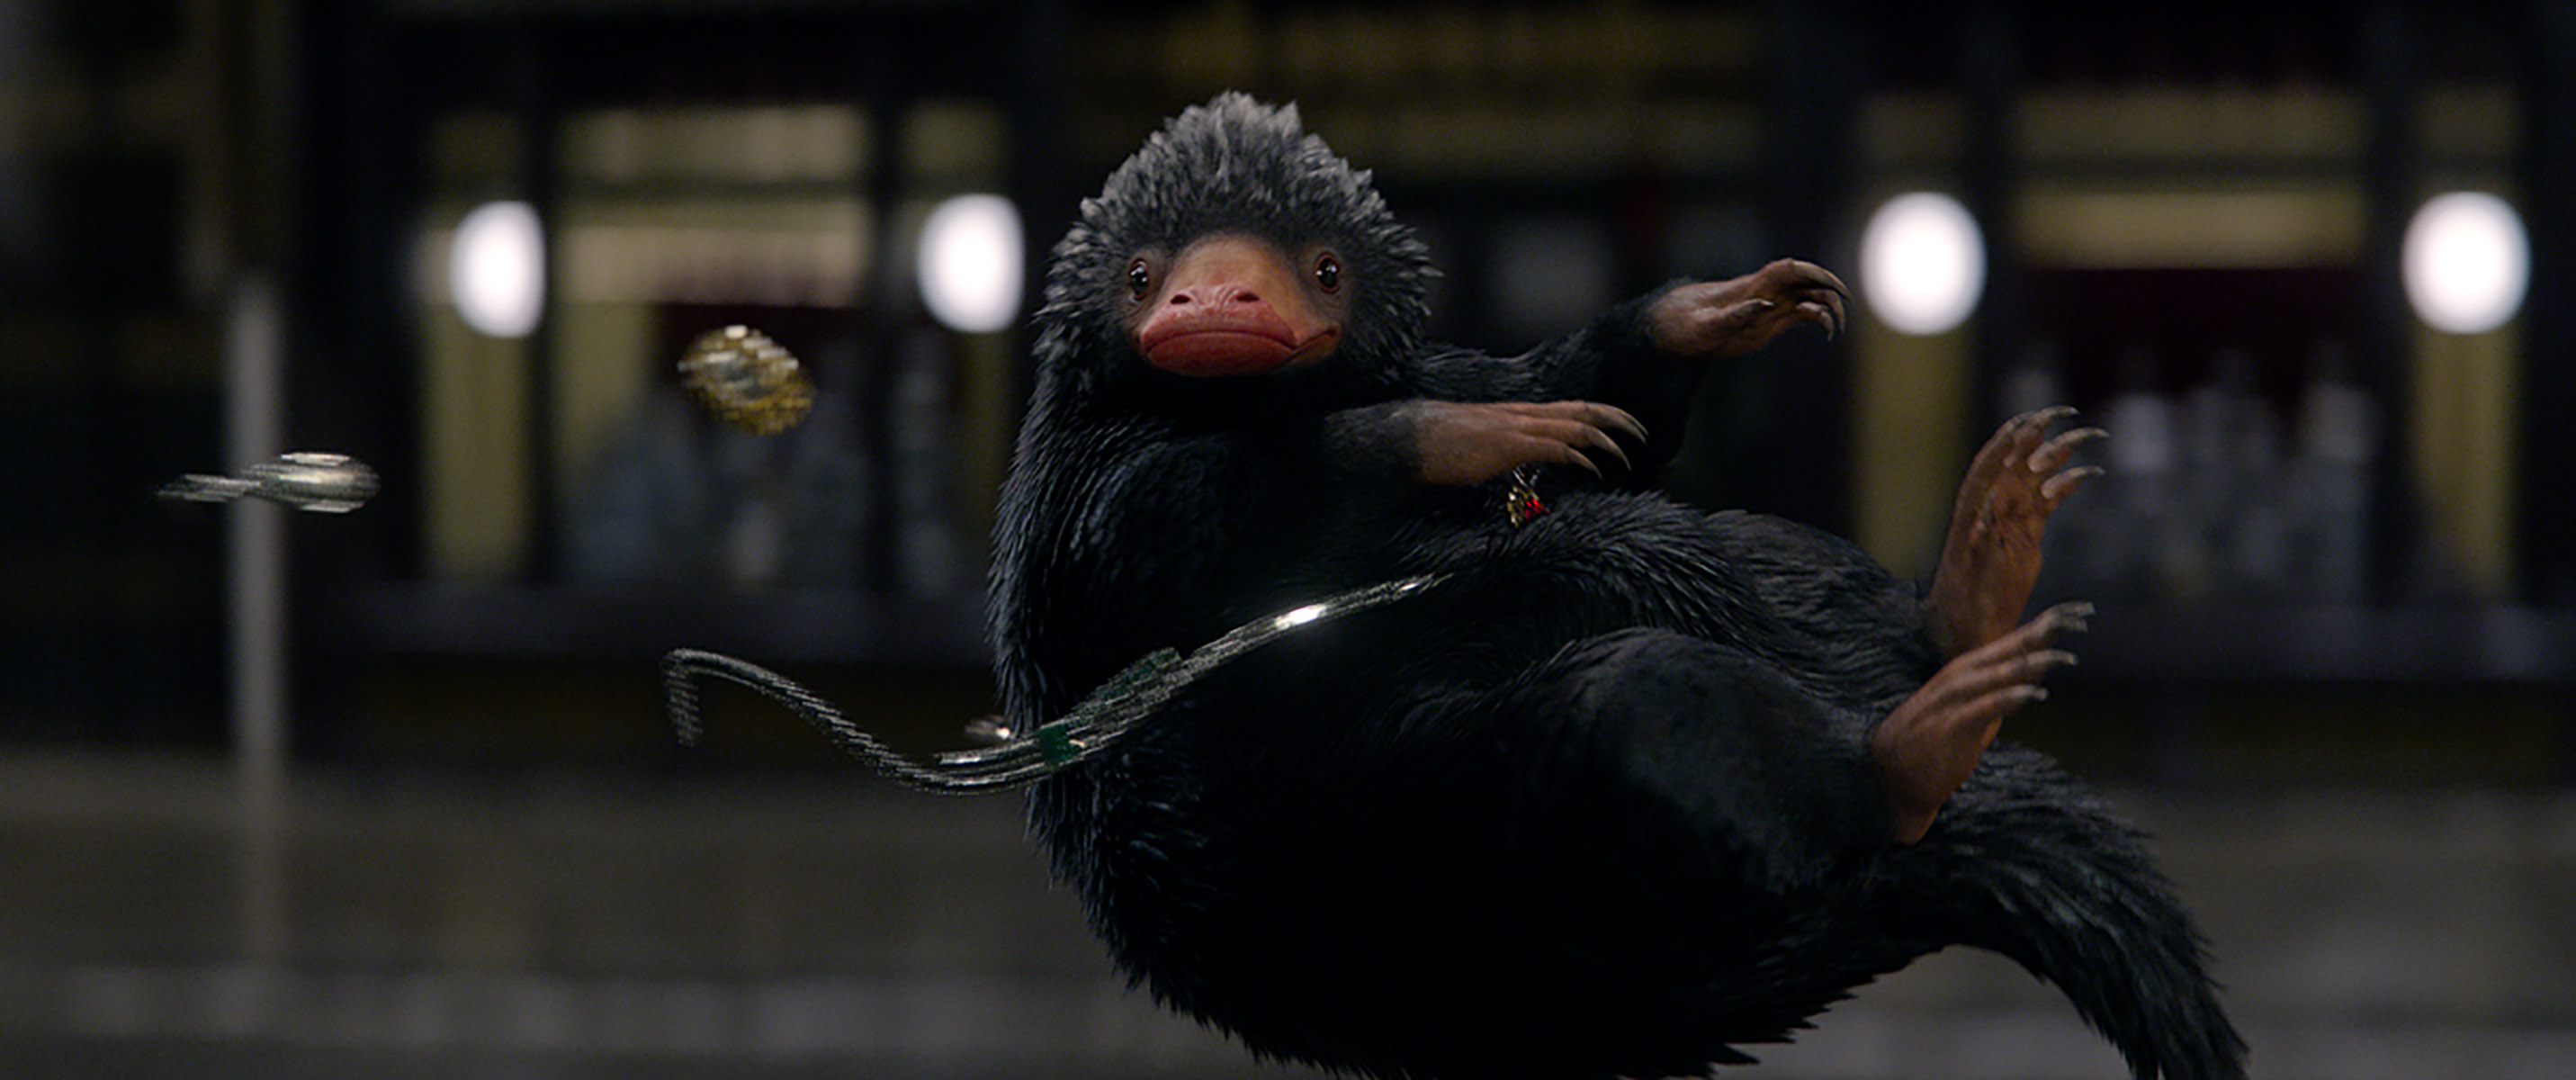 fantastic-beasts-and-where-to-find-them-niffler.jpg